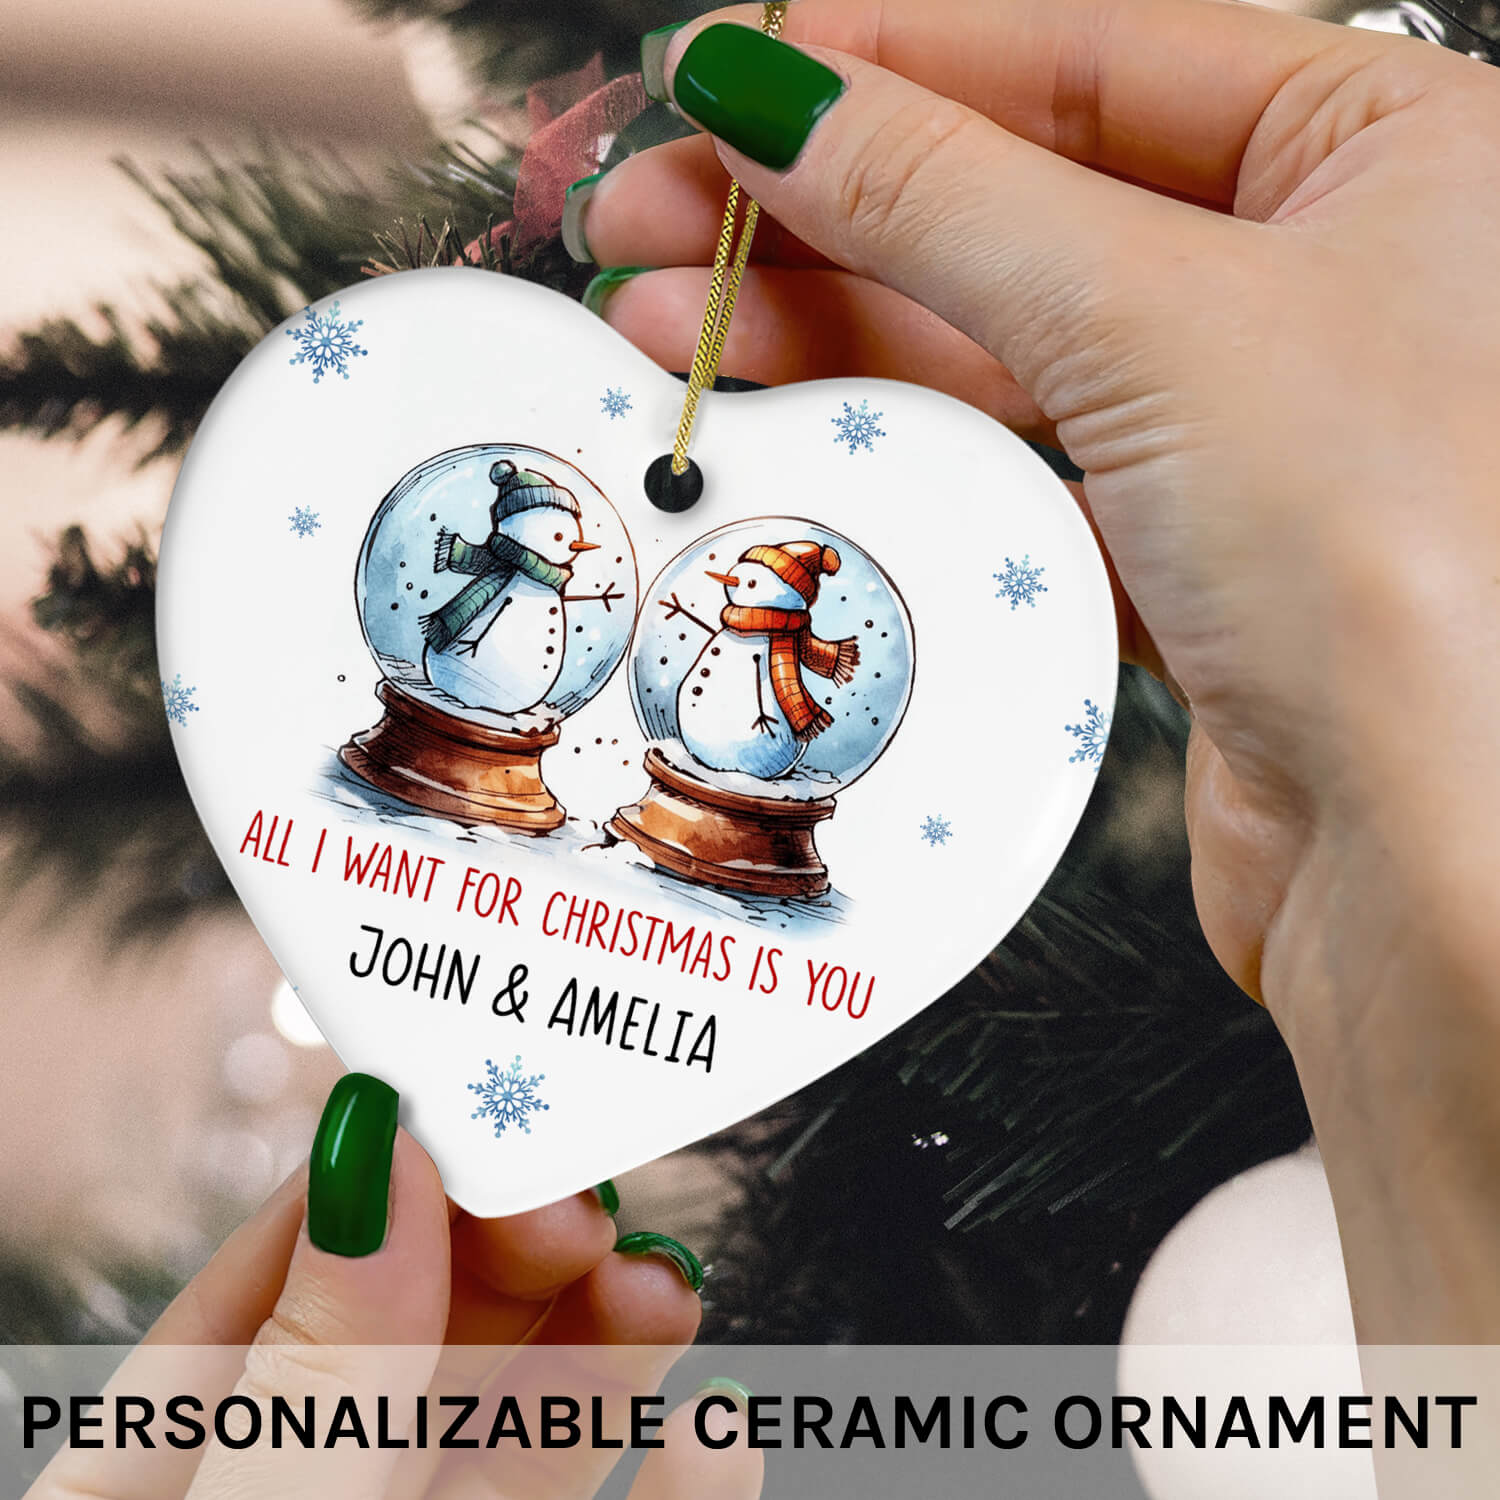 All I Want For Christmas Is You - Personalized Christmas gift For Long Distance Boyfriend or Girlfriend - Custom Heart Ceramic Ornament - MyMindfulGifts